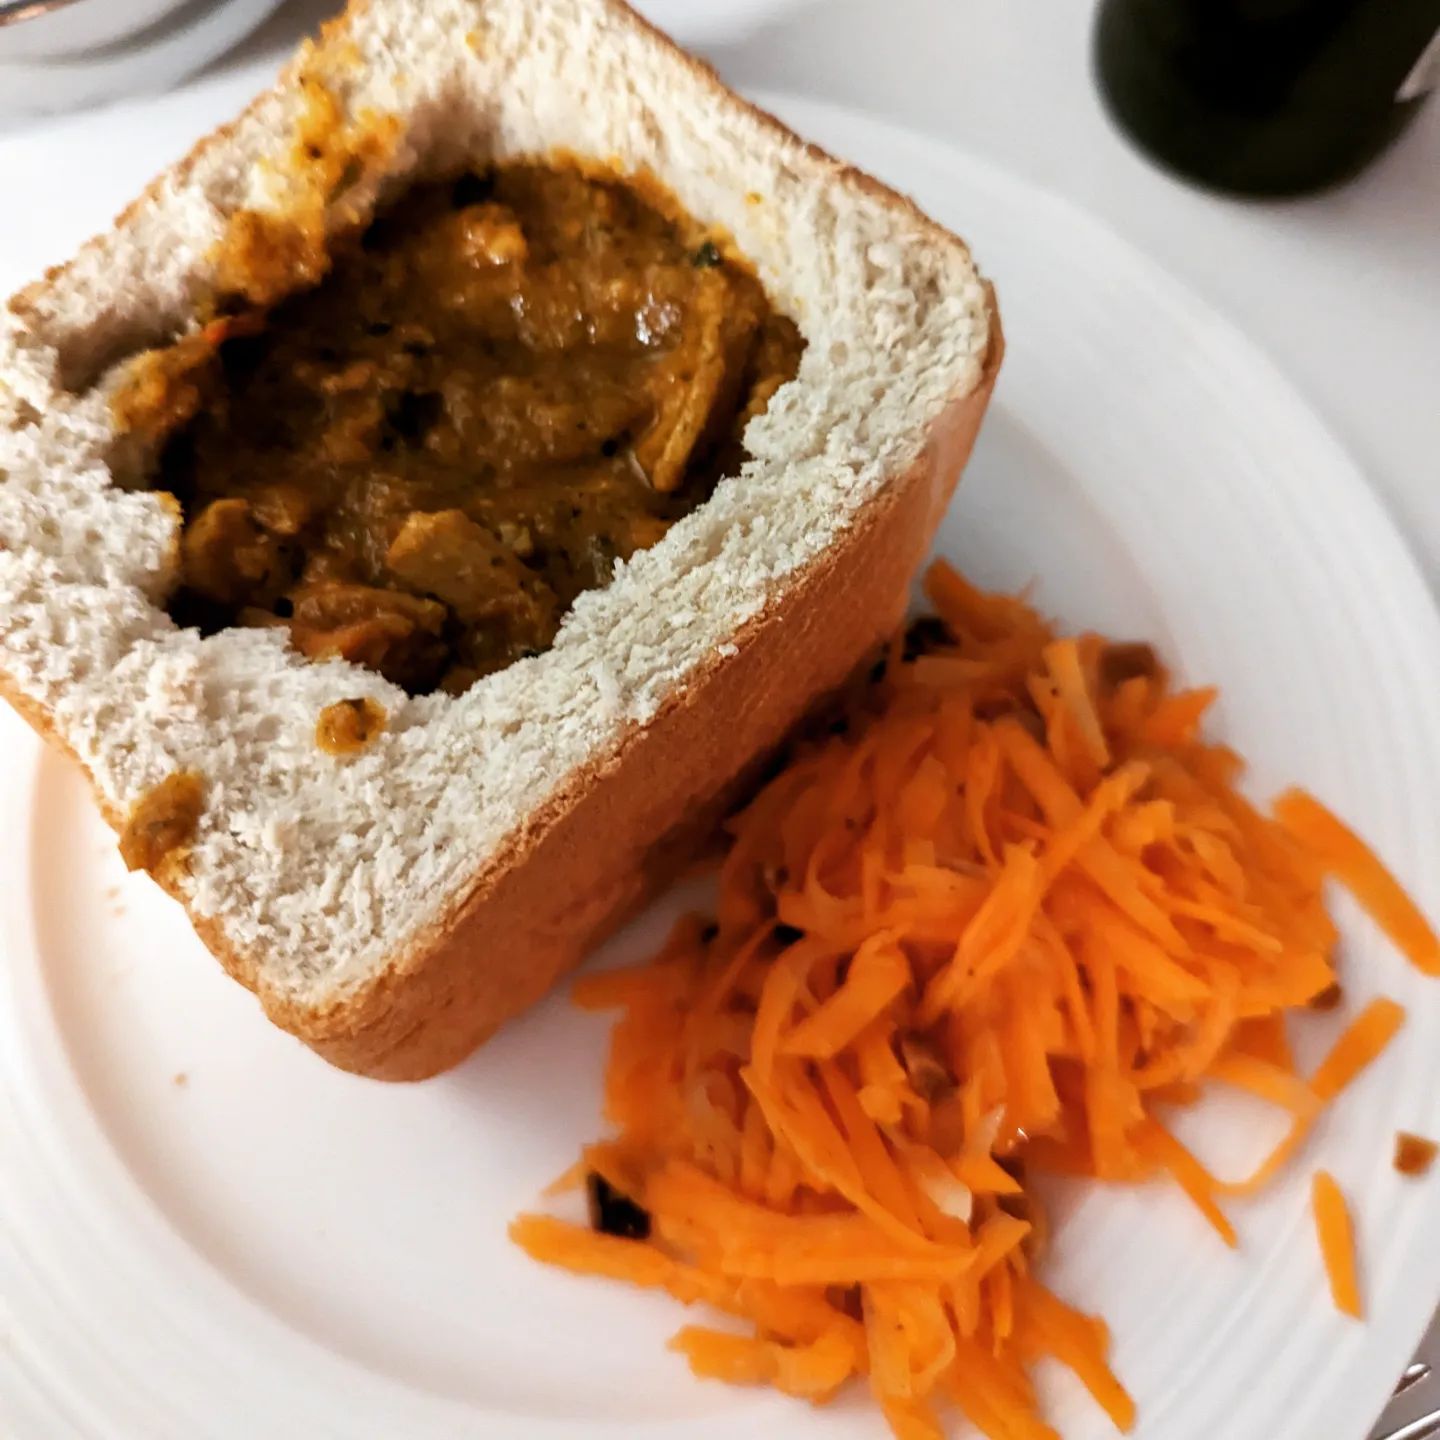 Purists would probably kick off, but as I only know a couple of those and most of them are here who cares what they think - tonight we made Bunny Chow! And it were brilliant.